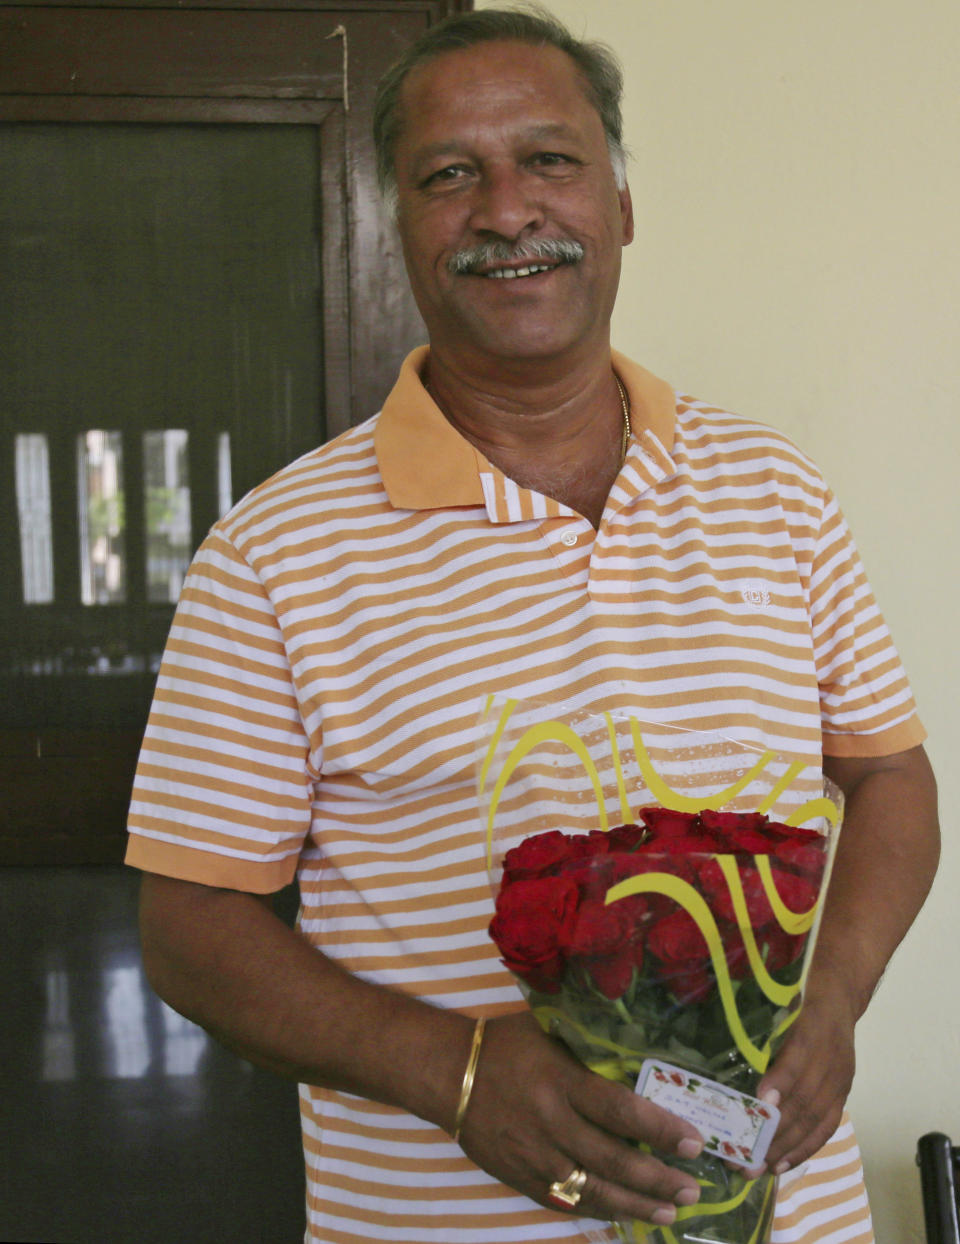 Former Indian Test cricketer and Board of Control for Cricket in India (BCCI) Vice-President Shivlal Yadav smiles as he accepts a bouquet of flowers at his residence in Hyderabad, India, Friday, March 28, 2014. India's Supreme Court ordered national cricket boss Narayanaswami Srinivasan to step aside on Friday until the completion of an investigation into corruption in the Indian Premier League (IPL). The court appointed test great Sunil Gavaskar as temporary president for the duration of the IPL and directed that the senior most Vice President of the Board, Yadav, will discharge the functions of BCCI president "with regard to all other matters," according to a local news agency. (AP Photo/Mahesh Kumar A.)